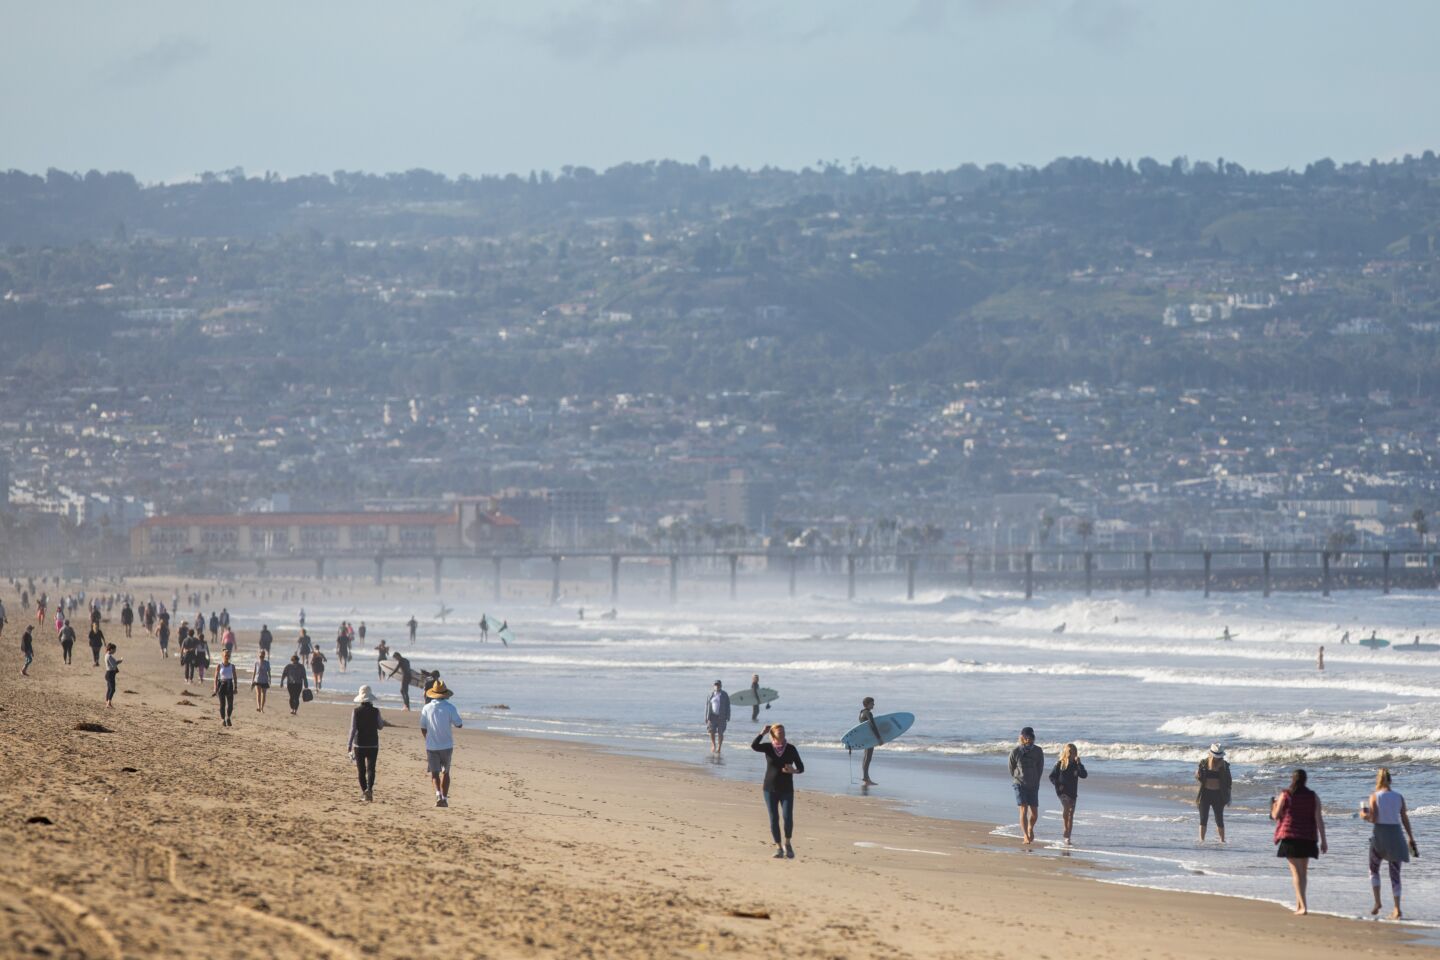 L.A. County beaches reopen for active use